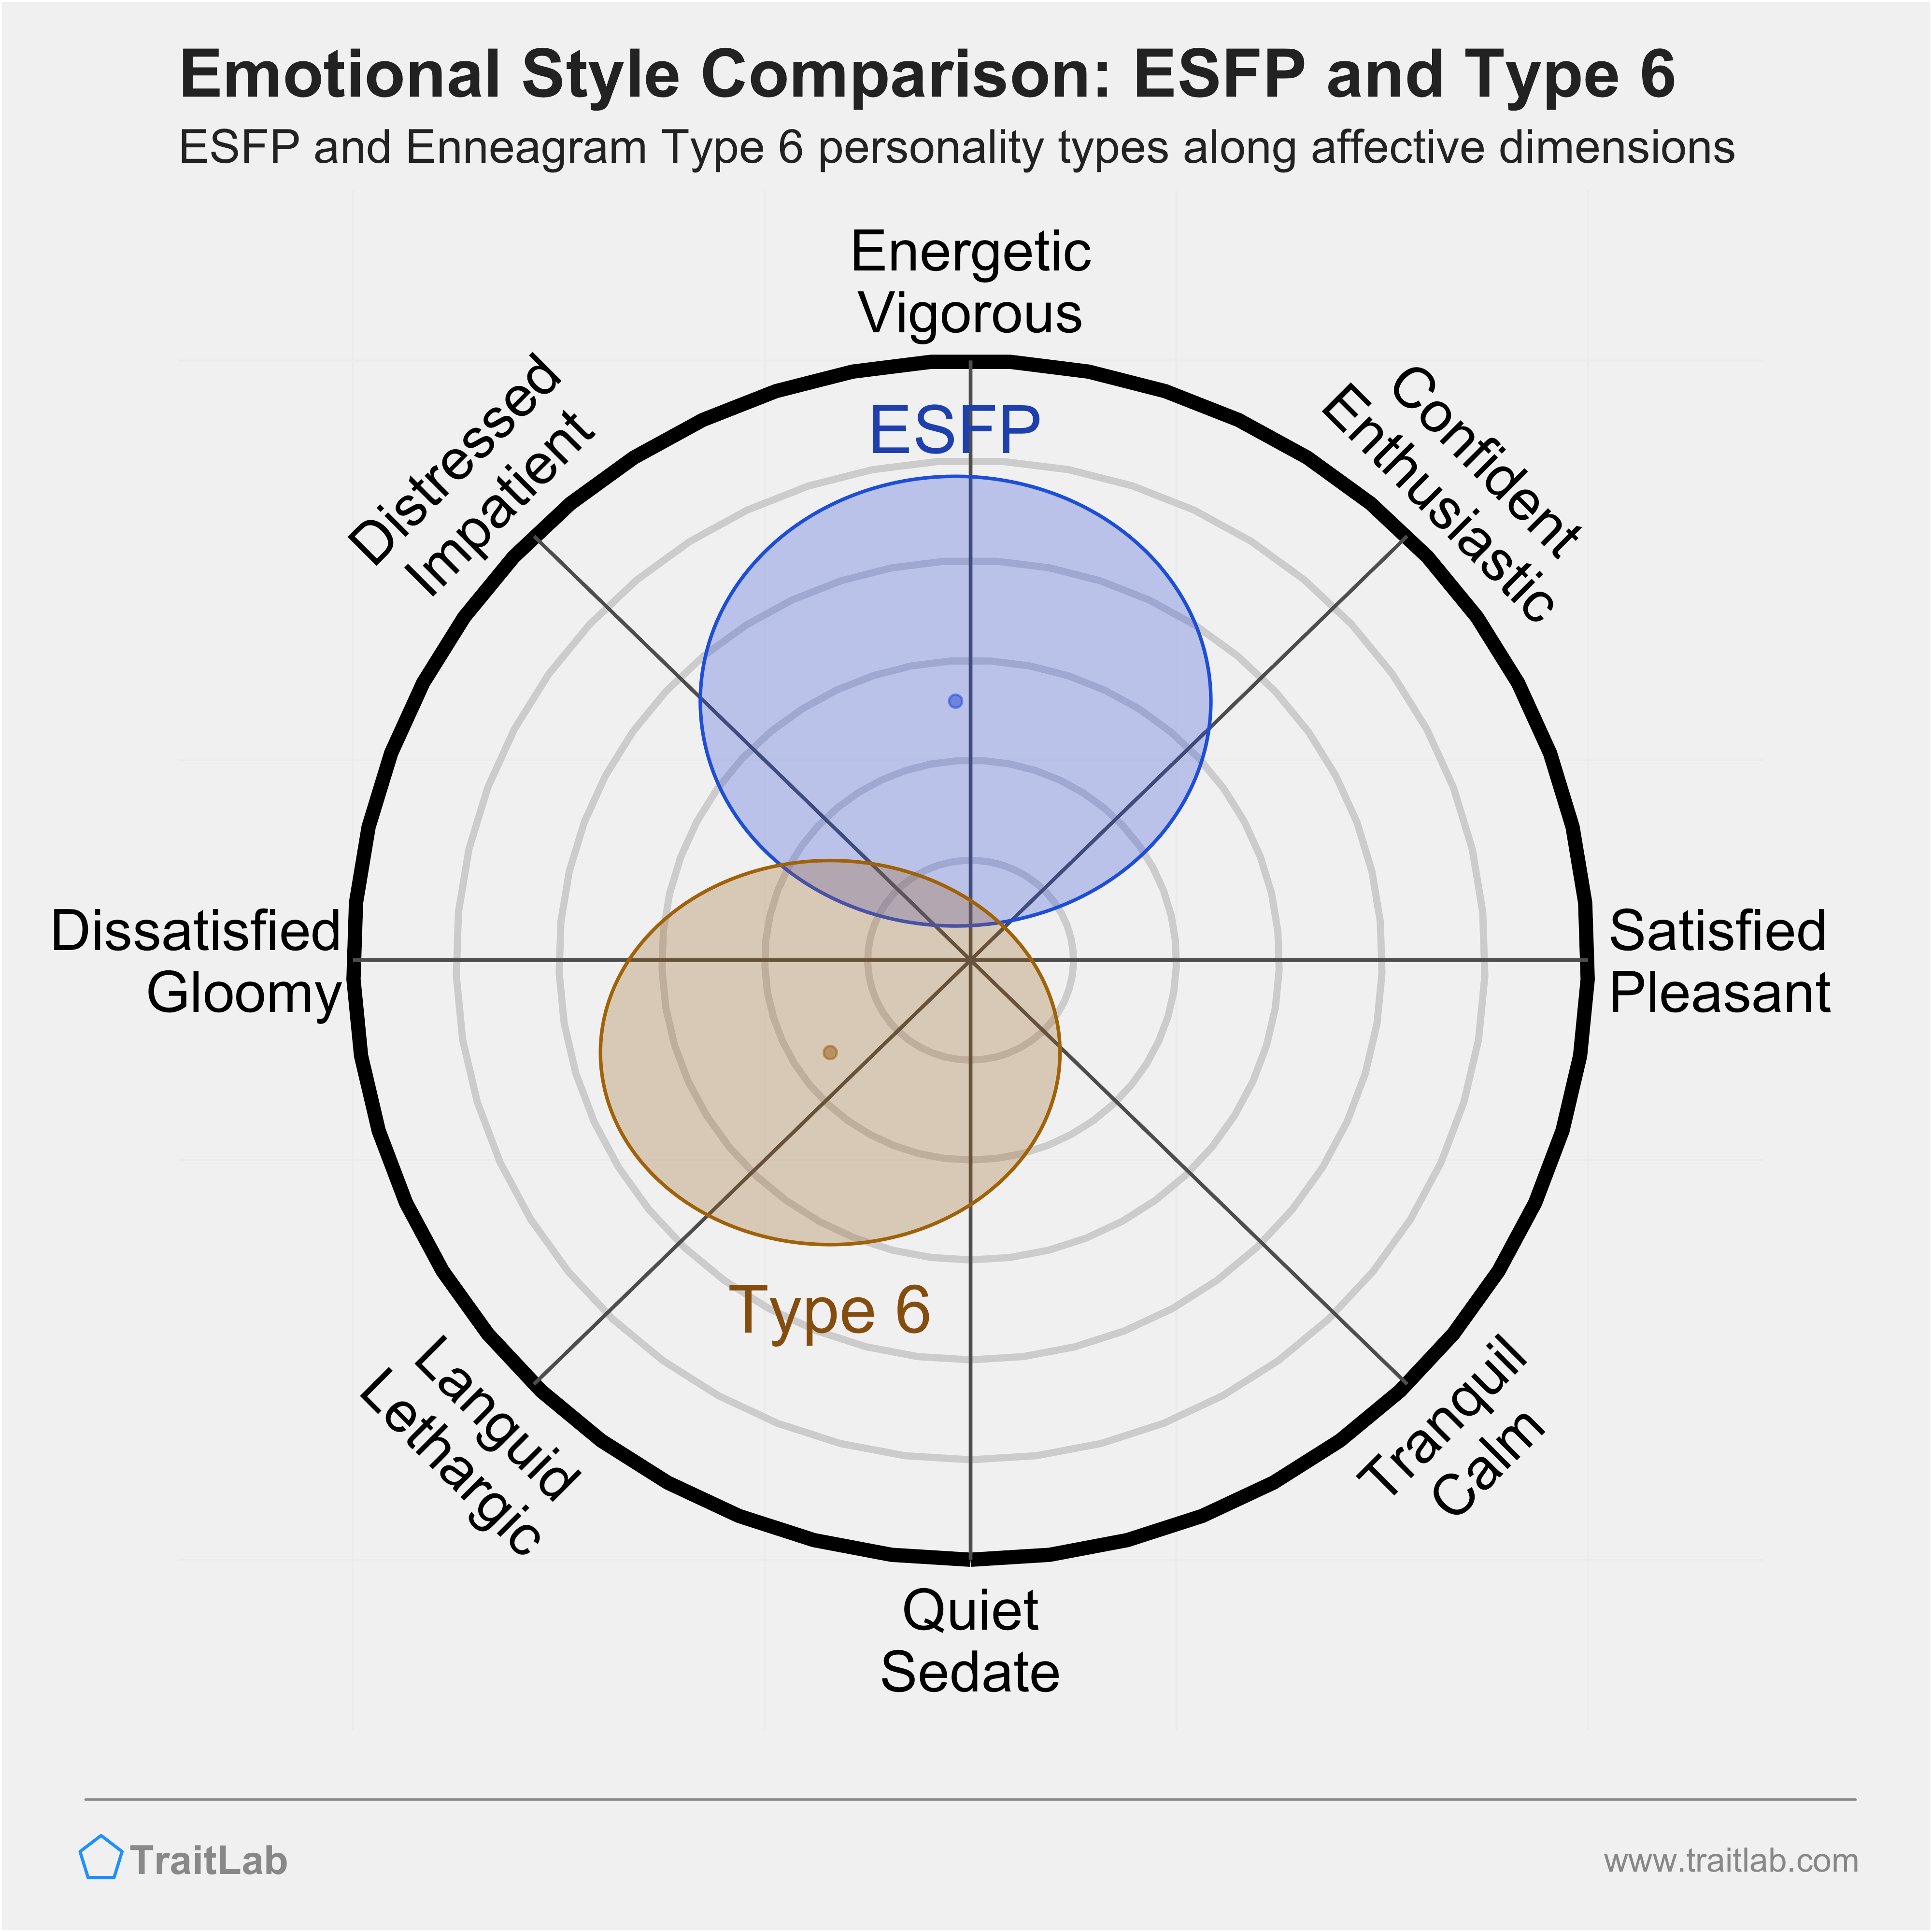 ESFP and Type 6 comparison across emotional (affective) dimensions